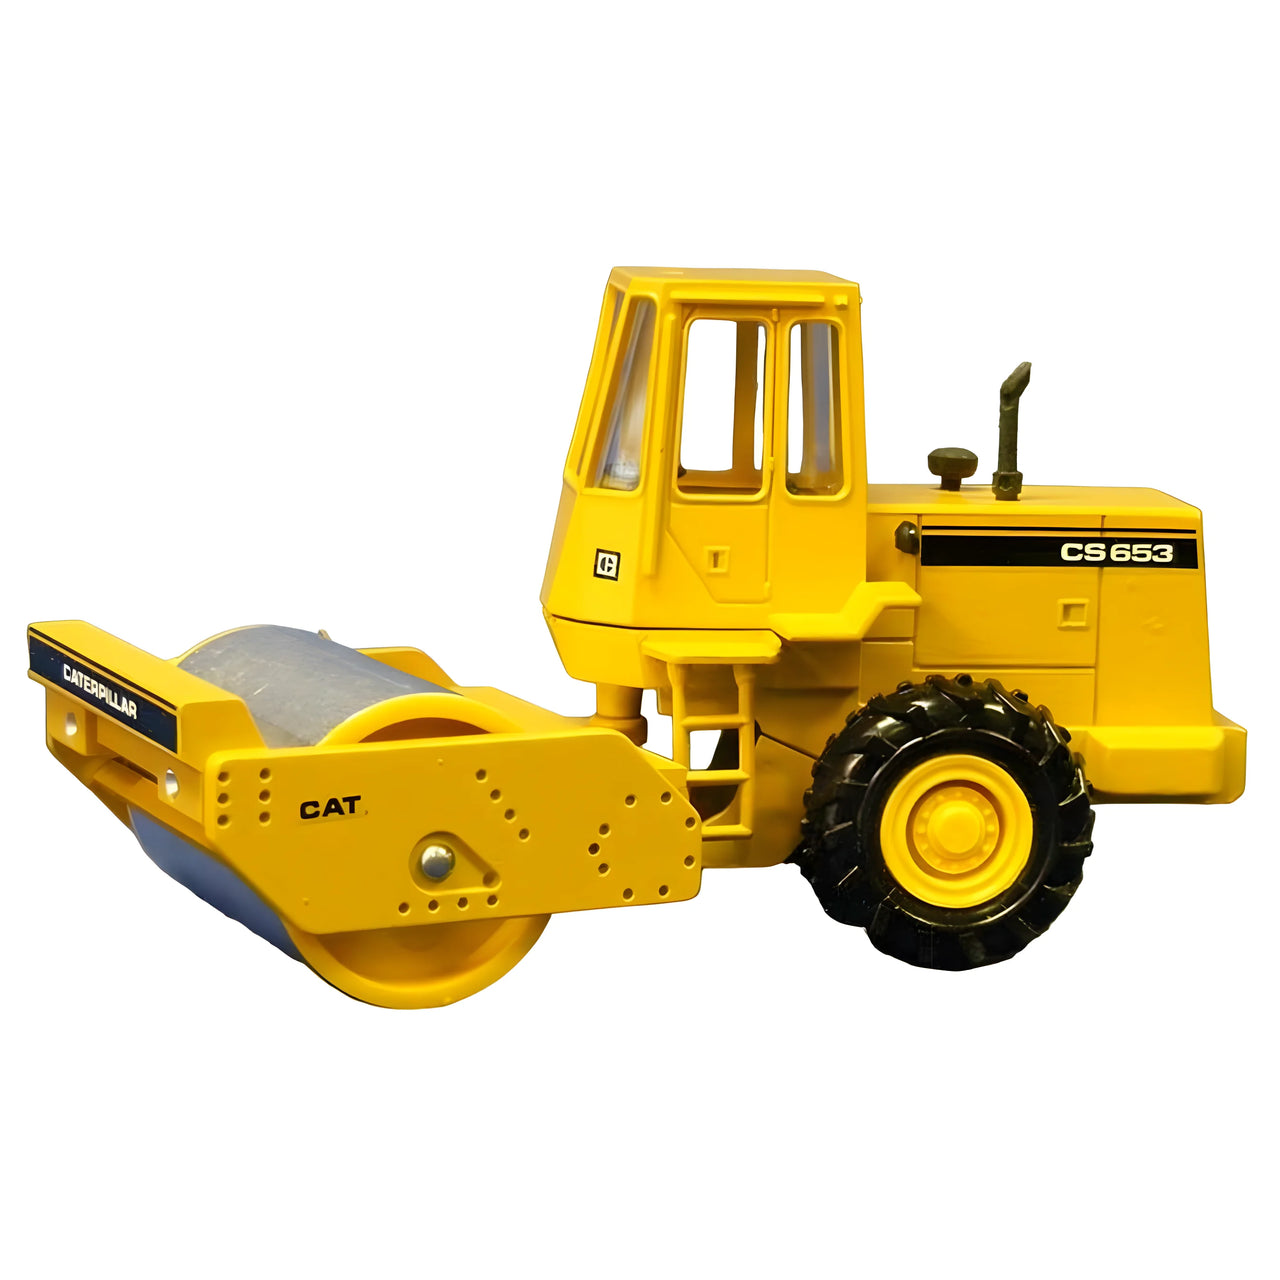 2889 Caterpillar CS653 Road Roller 1:50 Scale (Discontinued Model)